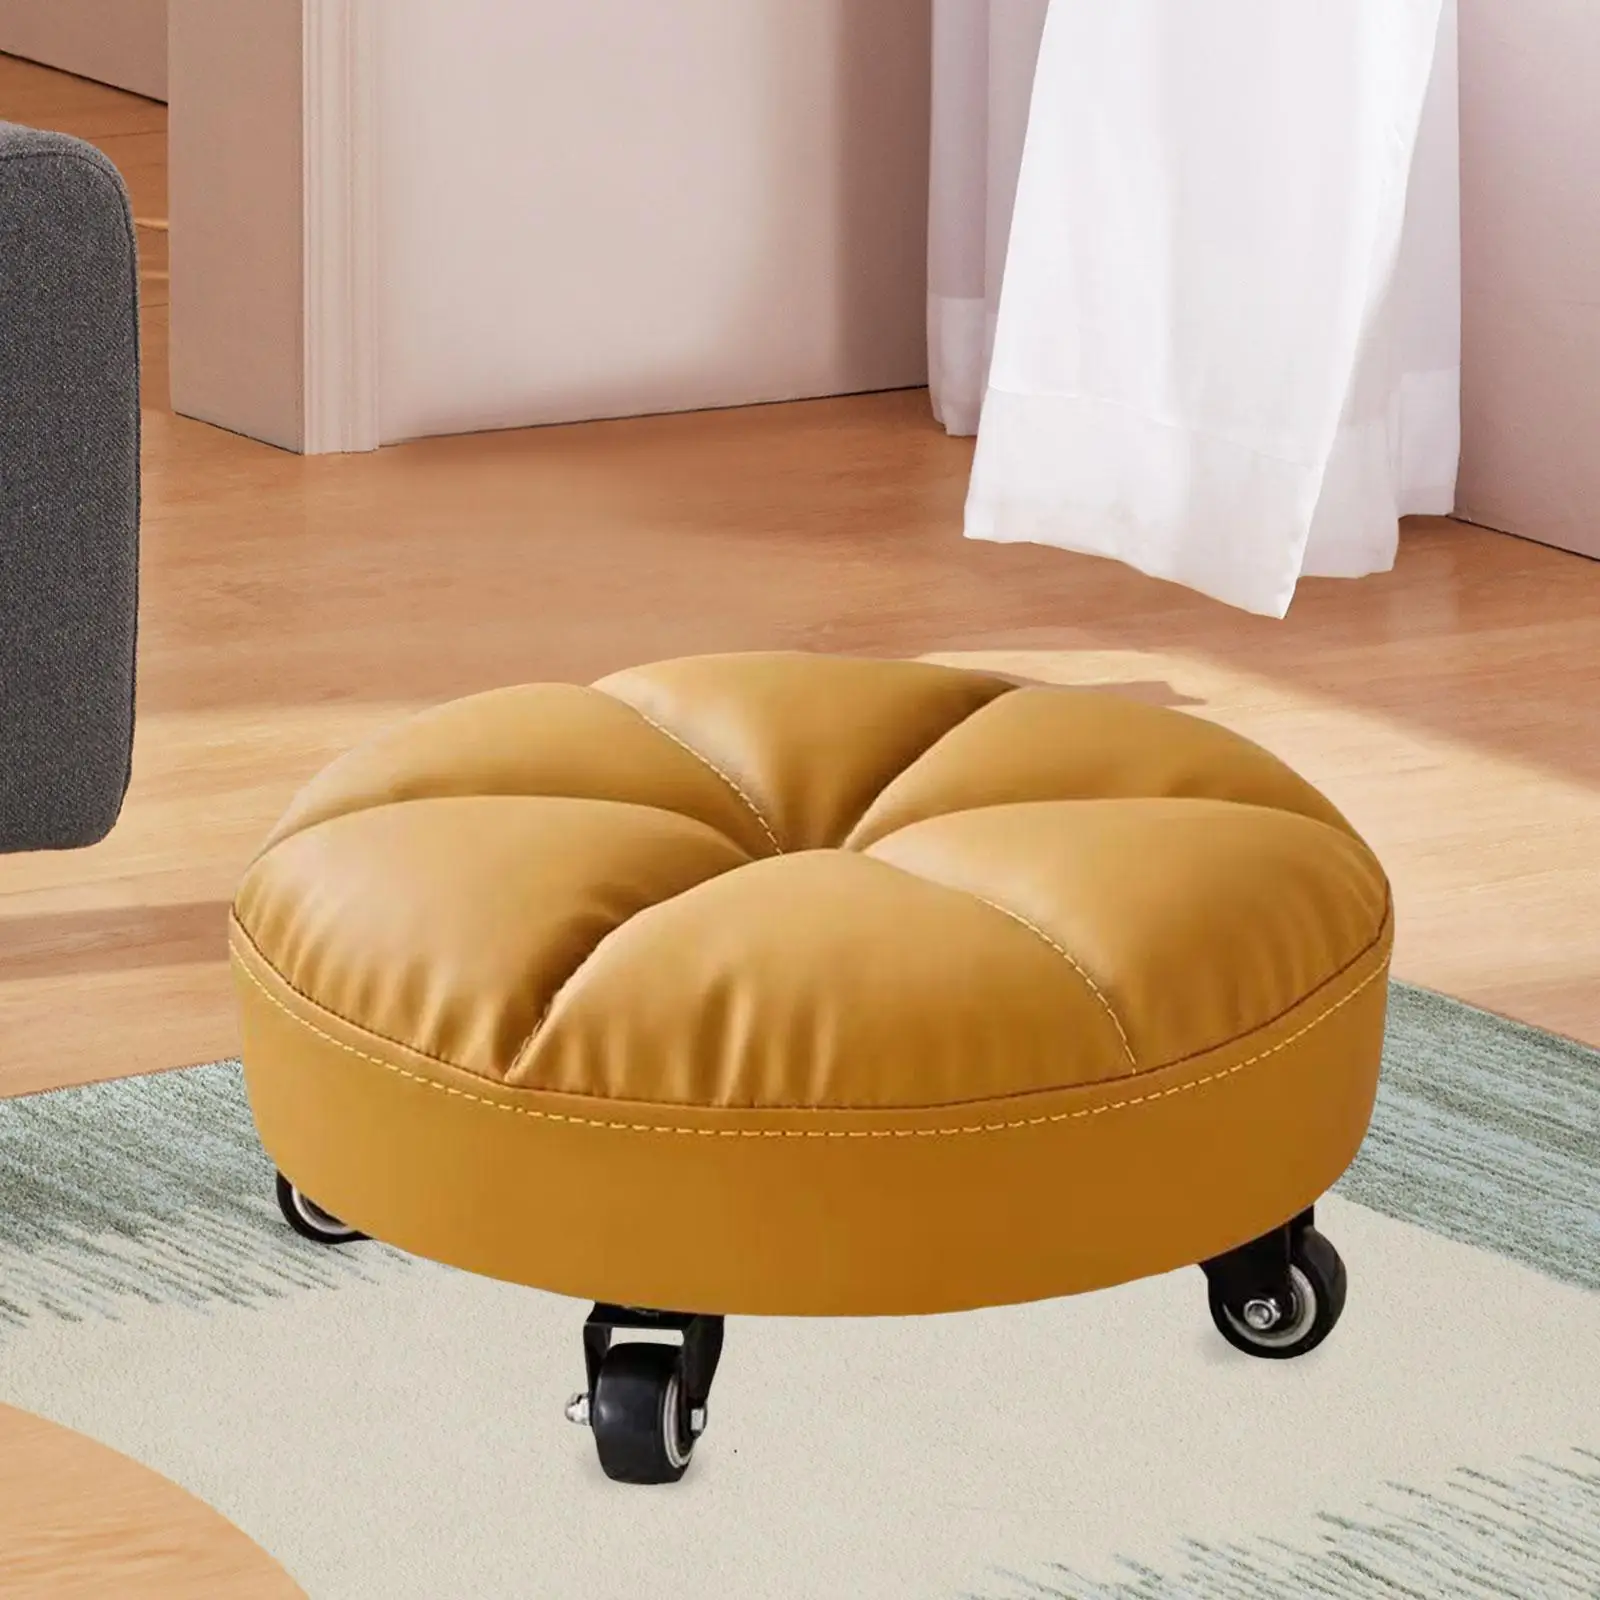 Rolling Stool with Wheels PU Leather Heavy Duty Sturdy Low Roller Seat Stool Mini Stool for Home Library Office Adult